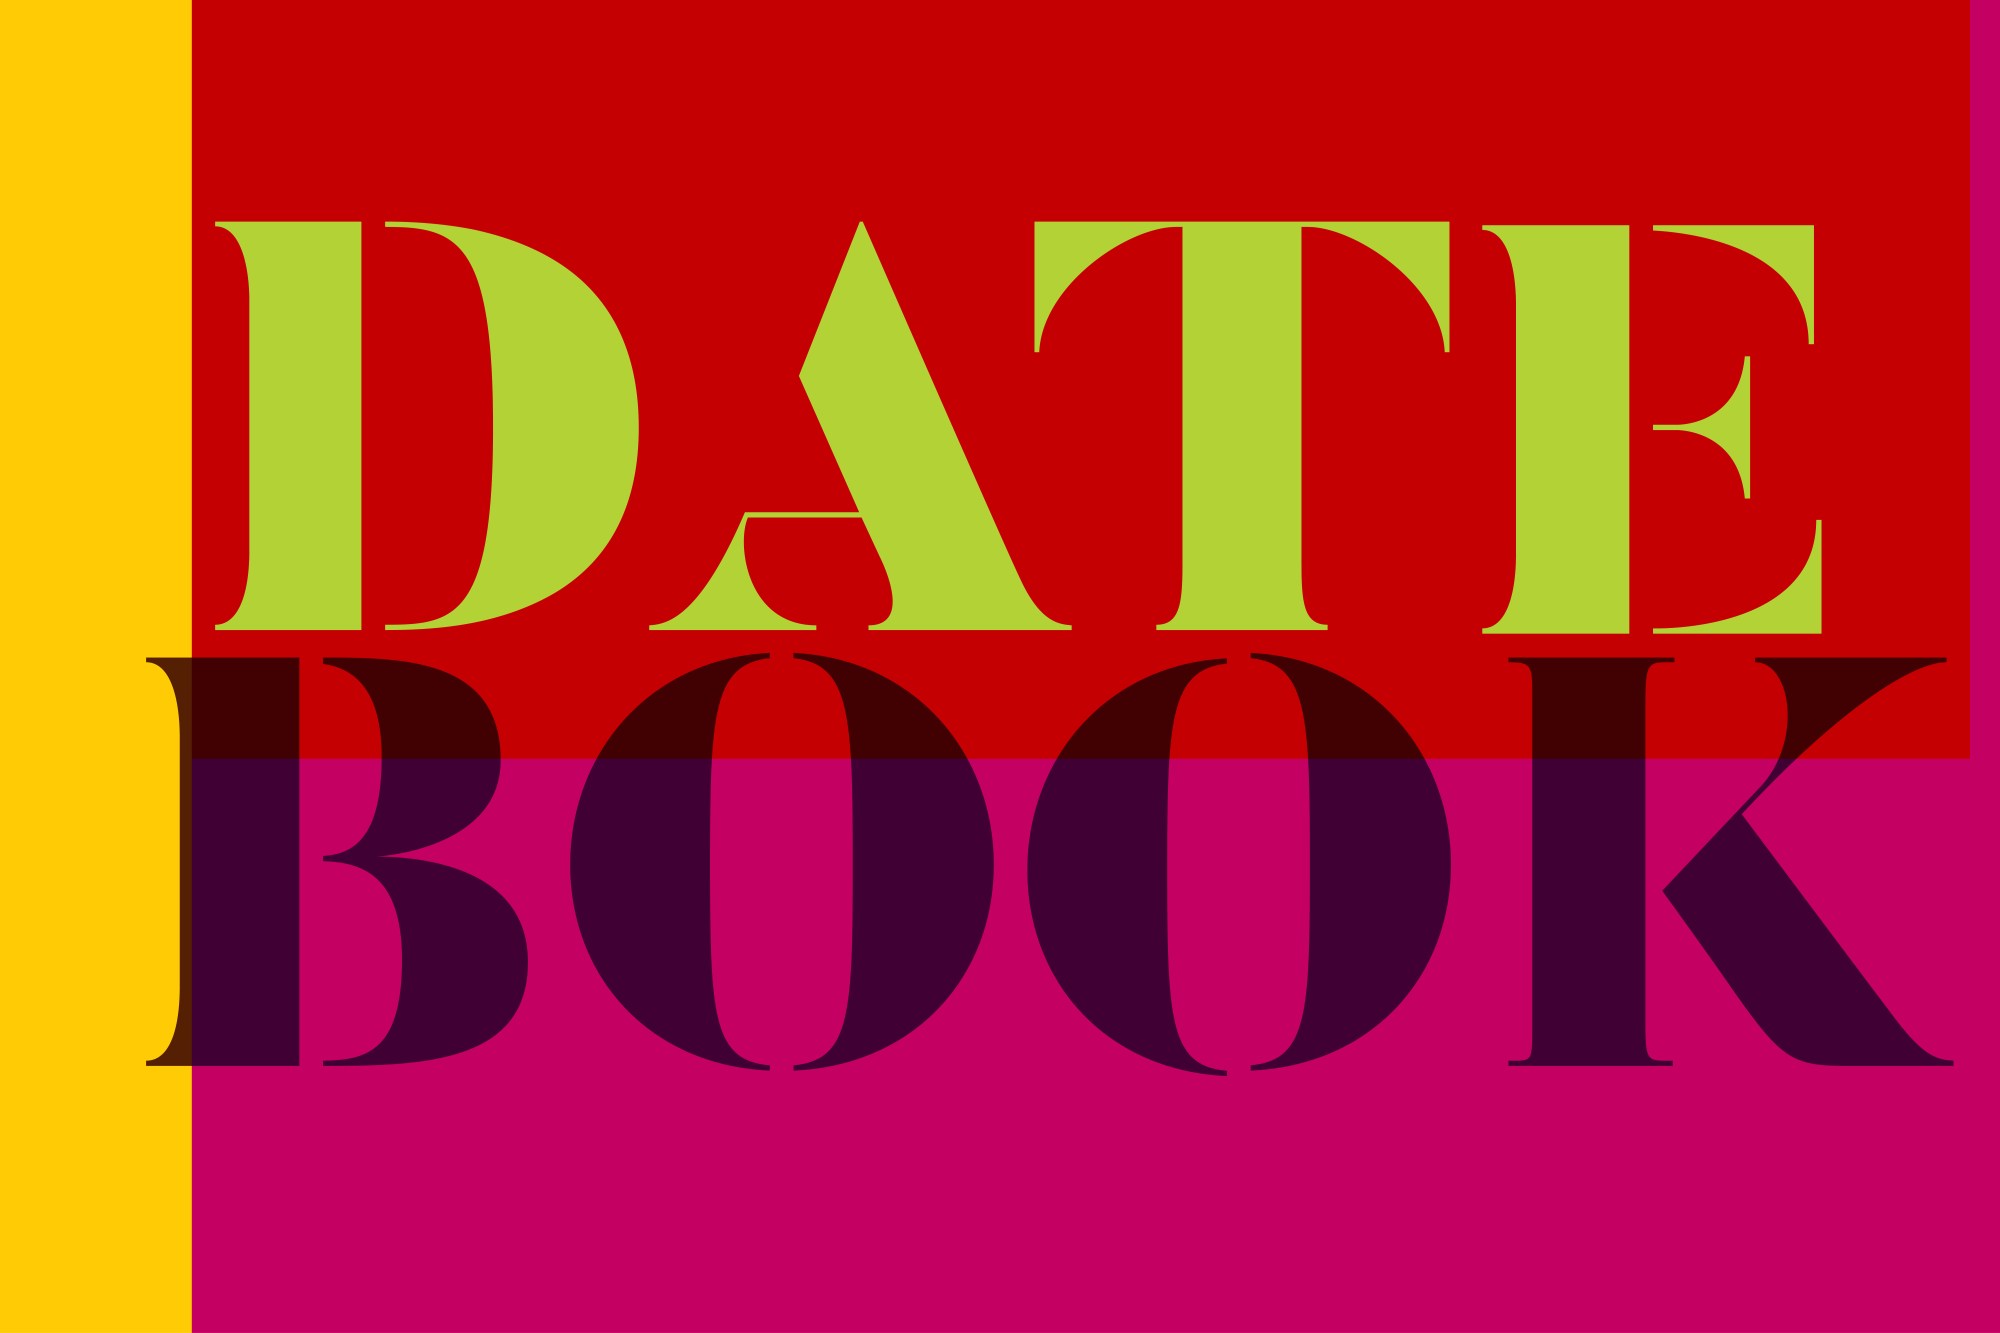 a bold red, pink, and yellow graphic with the words "date" and "book" stacked on top of each other